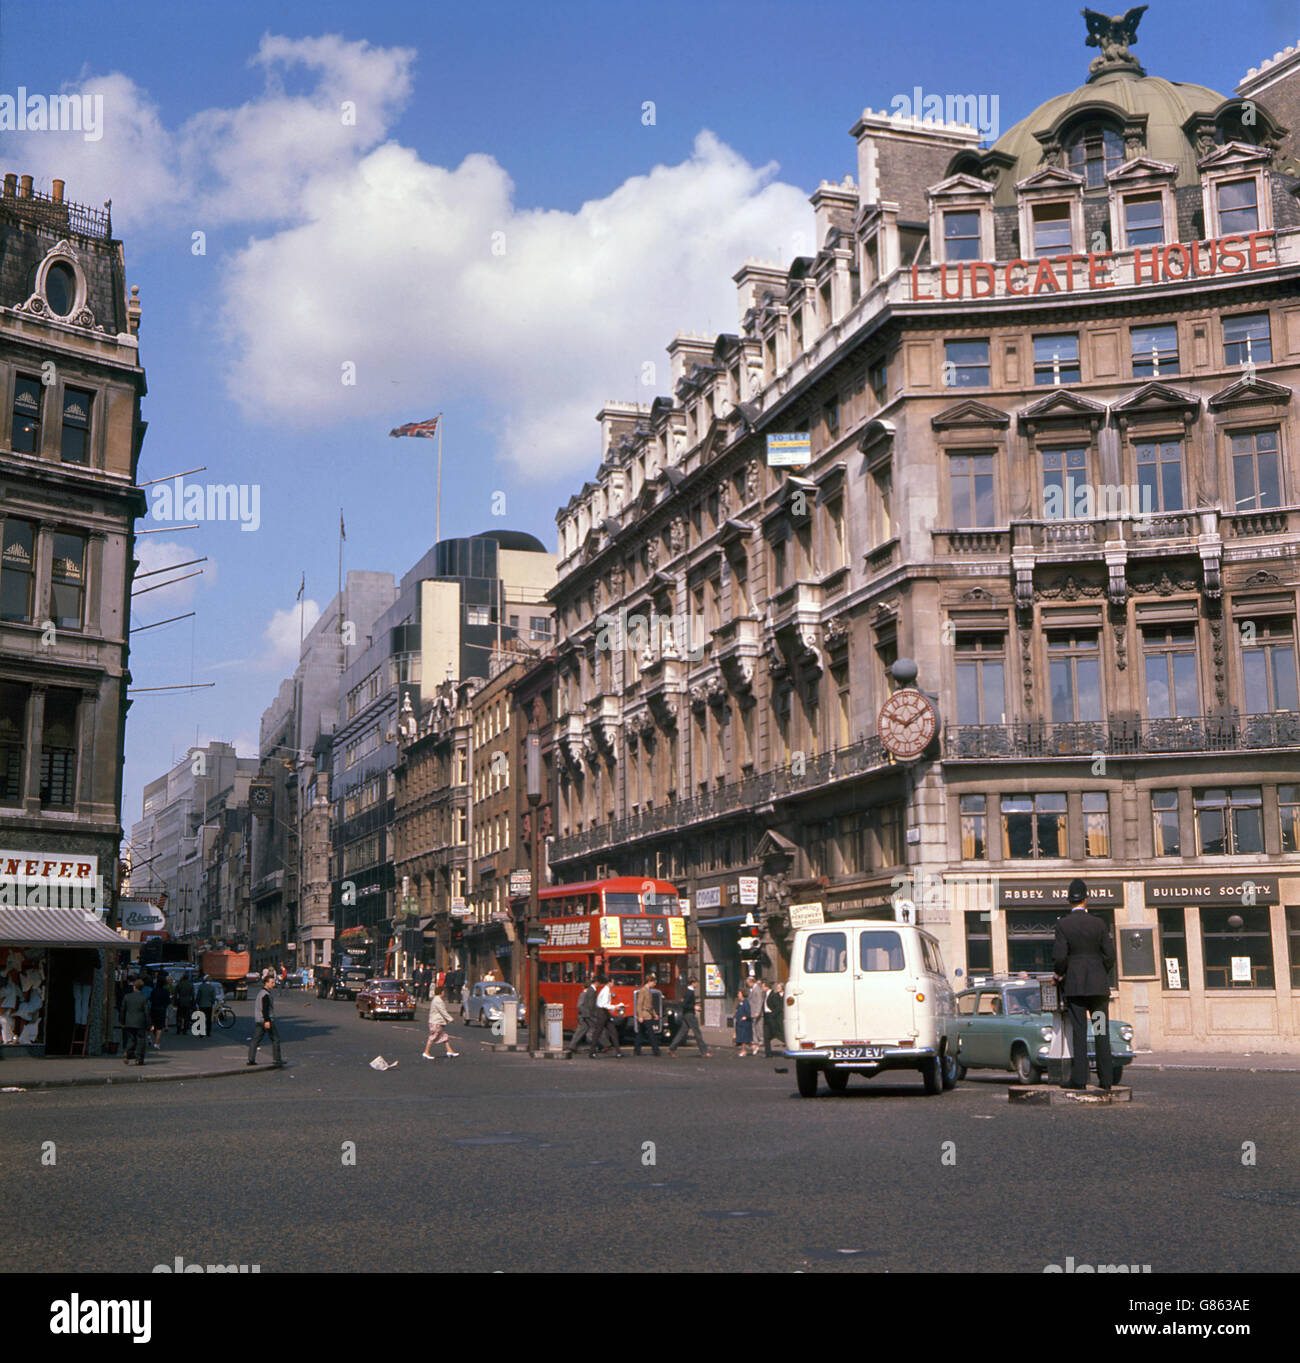 View of Ludgate Circus, looking up Fleet Street, with Ludgate House pictured on the right. Stock Photo